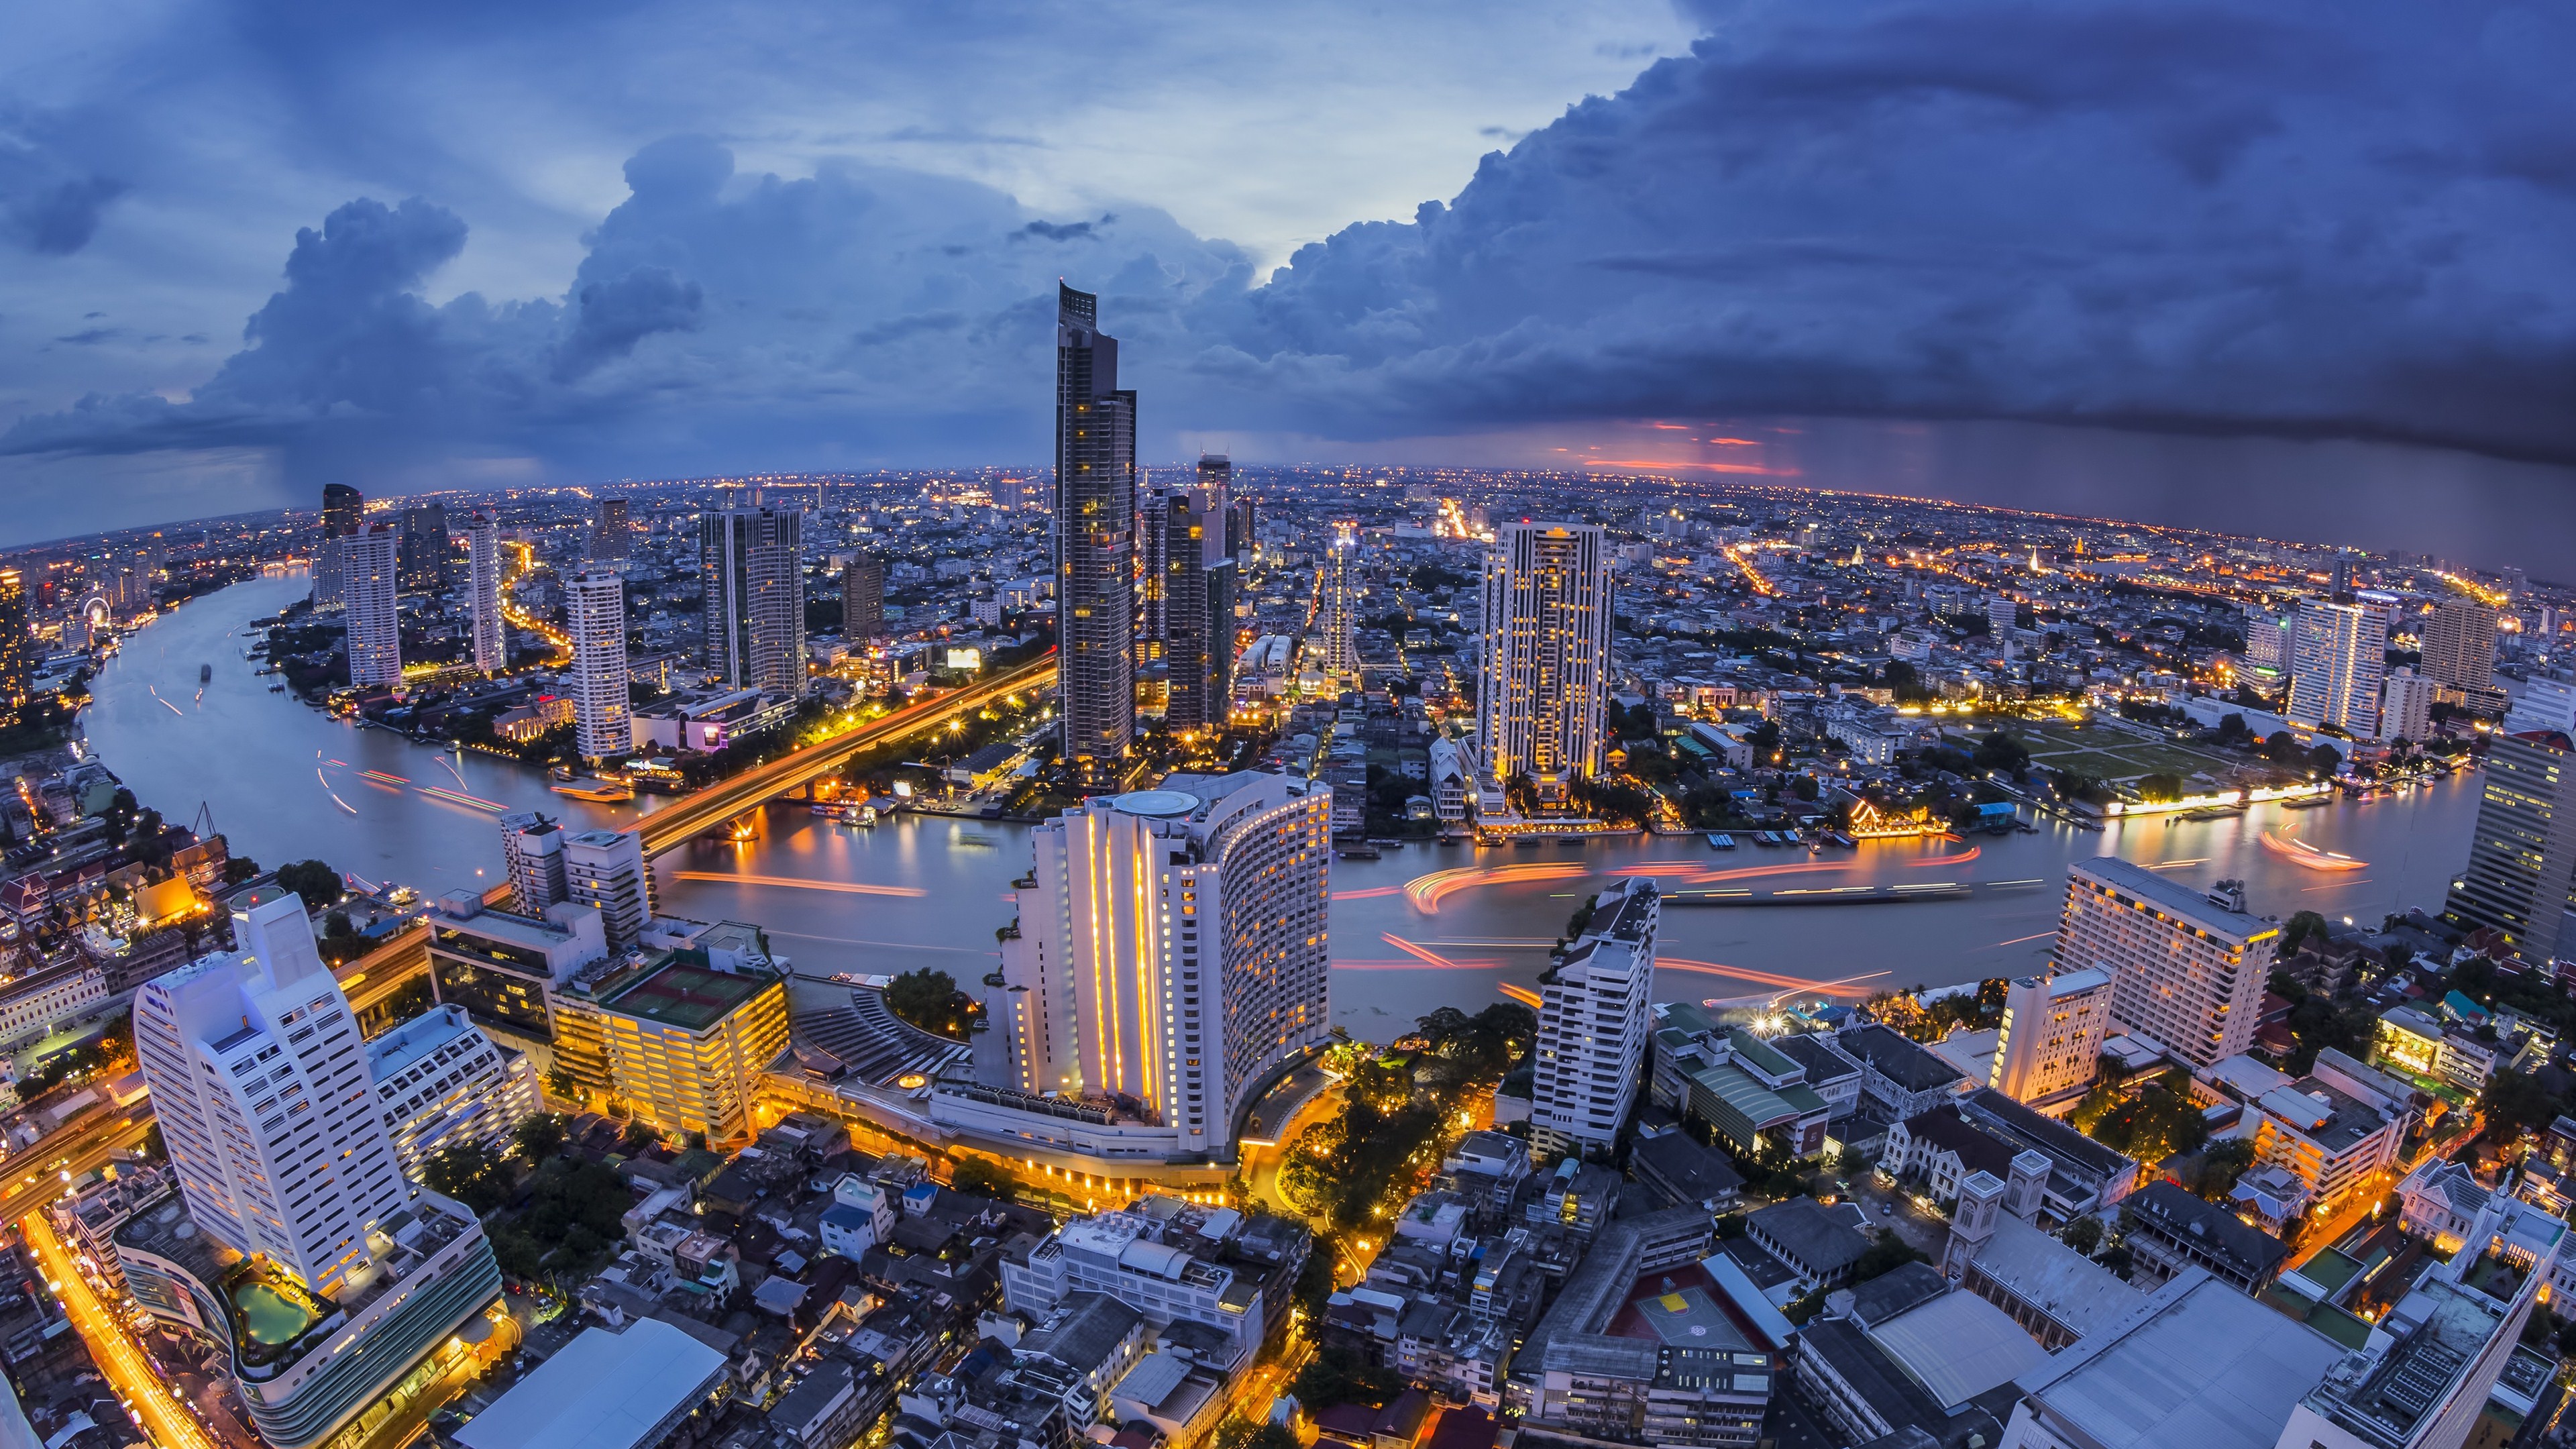 Cities ThailandHD Wallpaper Background Image